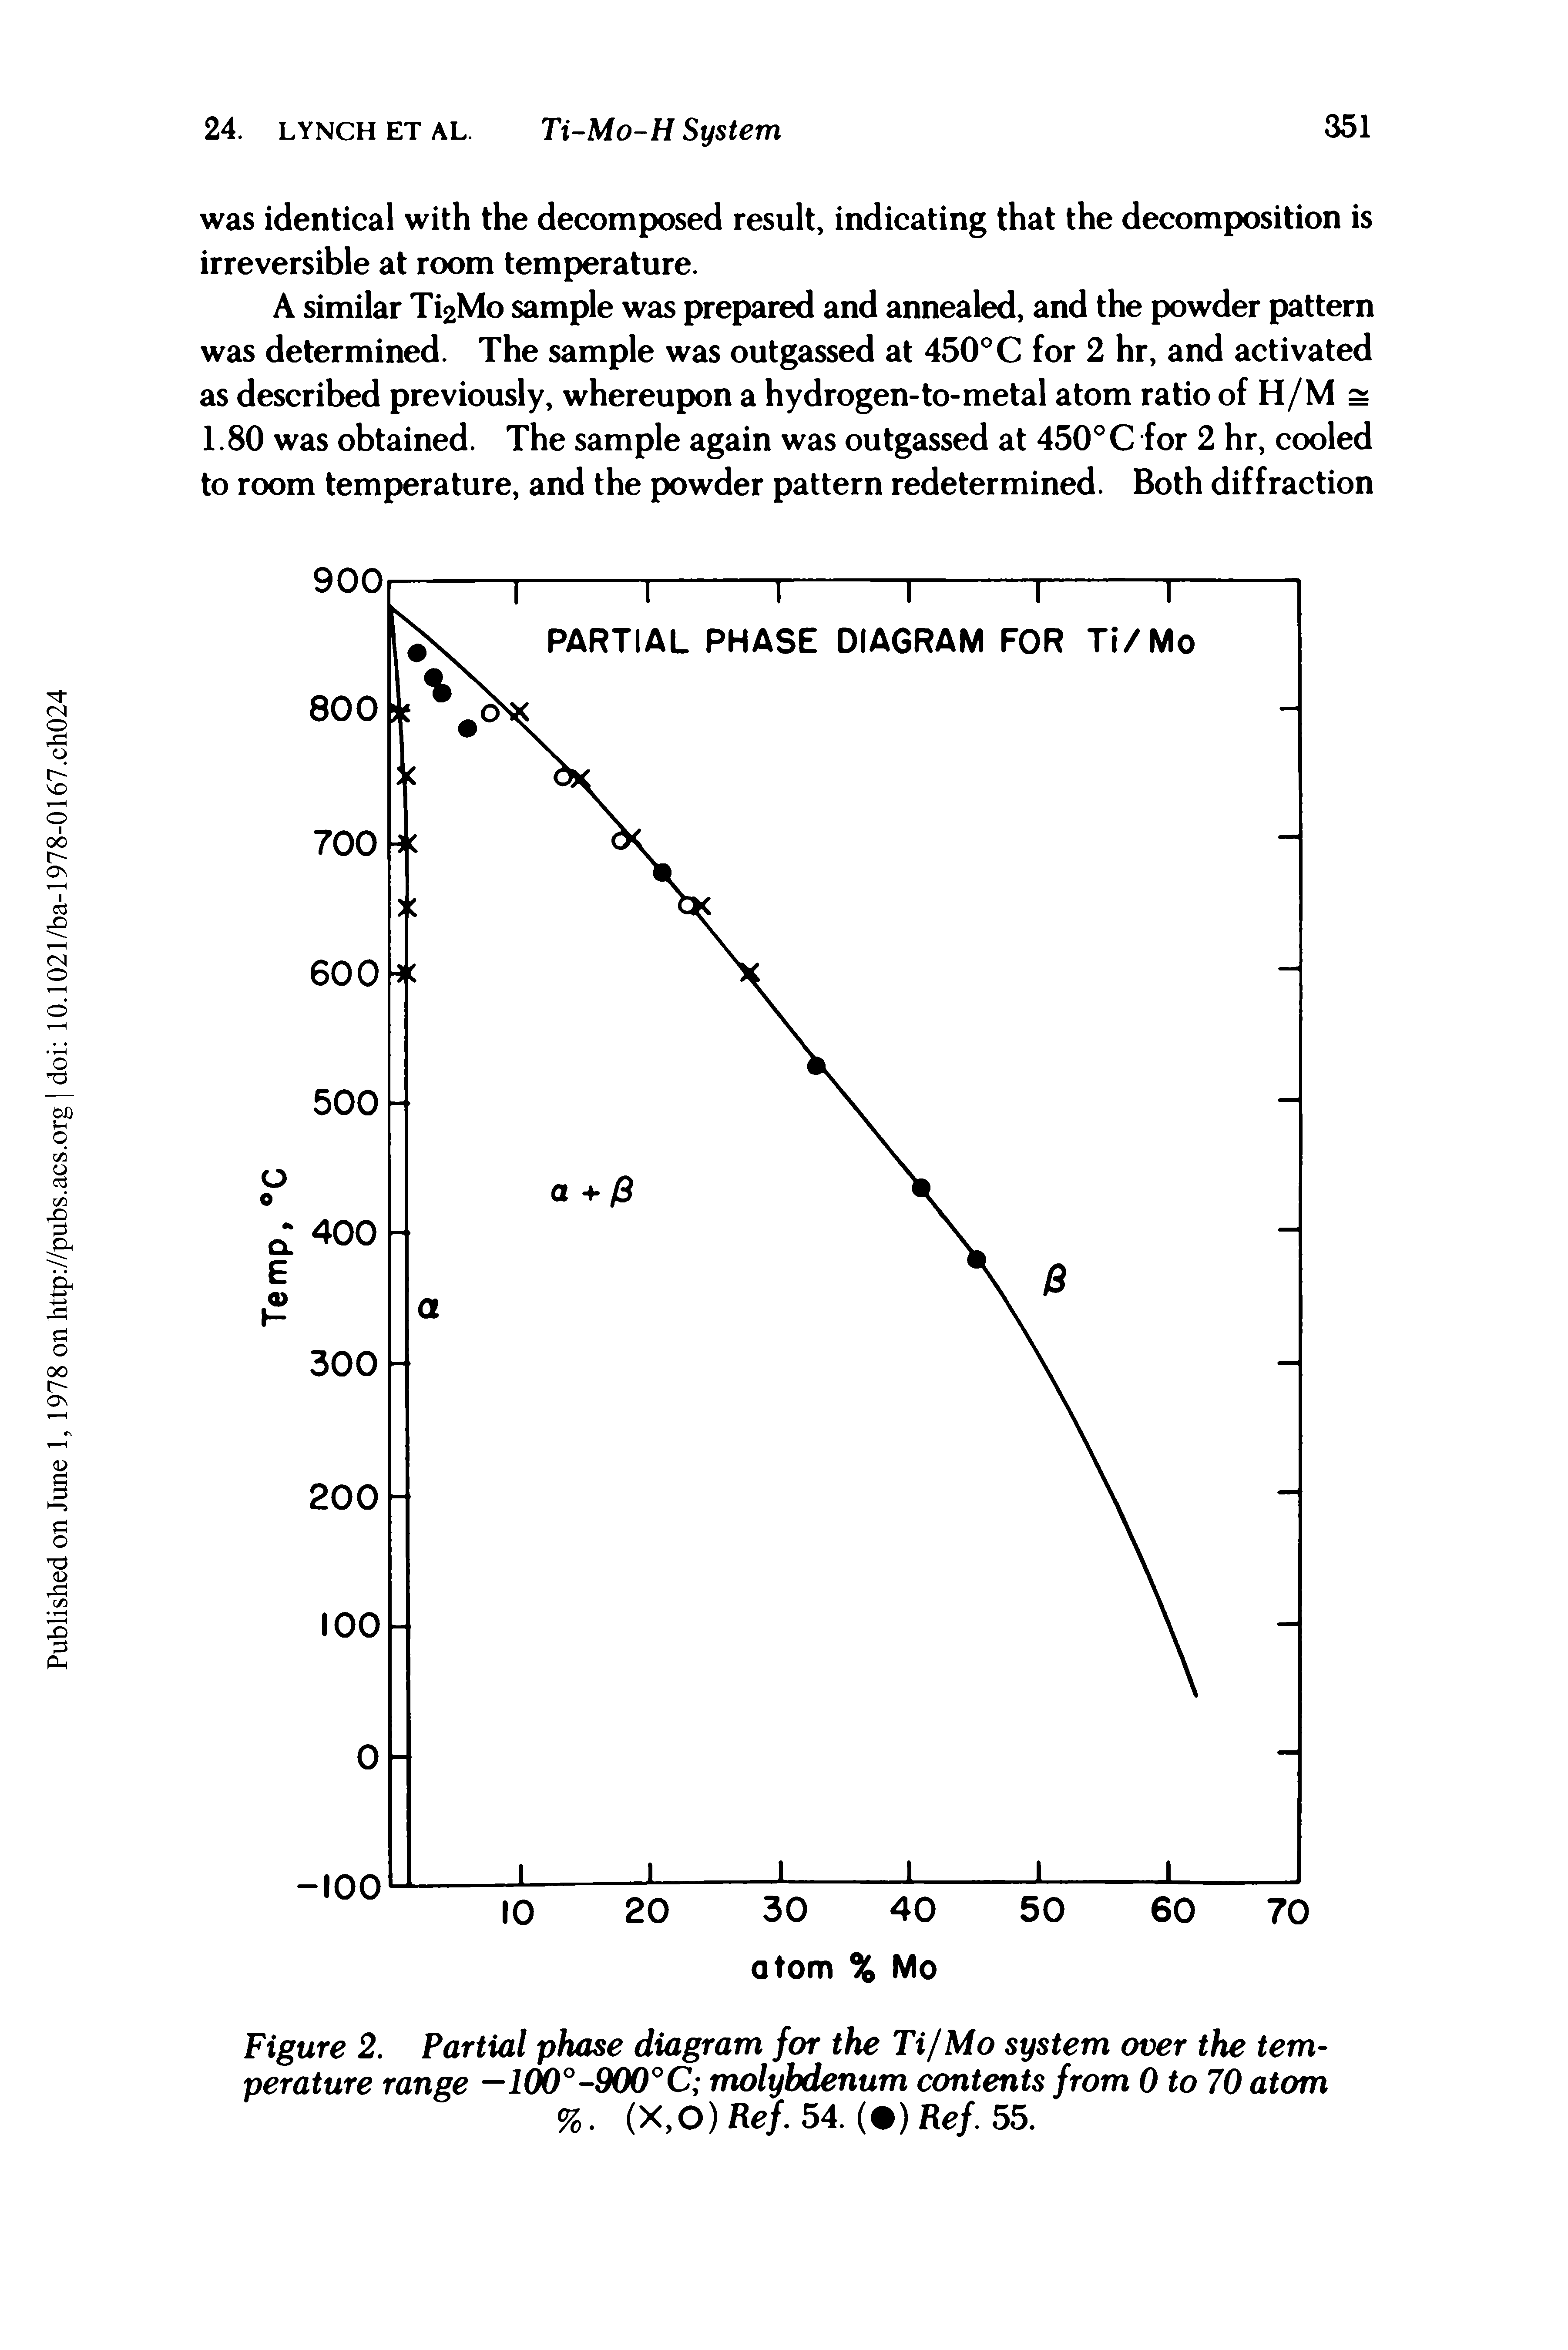 Figure 2. Partial phase diagram for the Ti/Mo system over the temperature range —100°-900°C molybdenum contents from 0 to 70 atom %. (X,0) Ref. 54. ( ) Ref. 55.